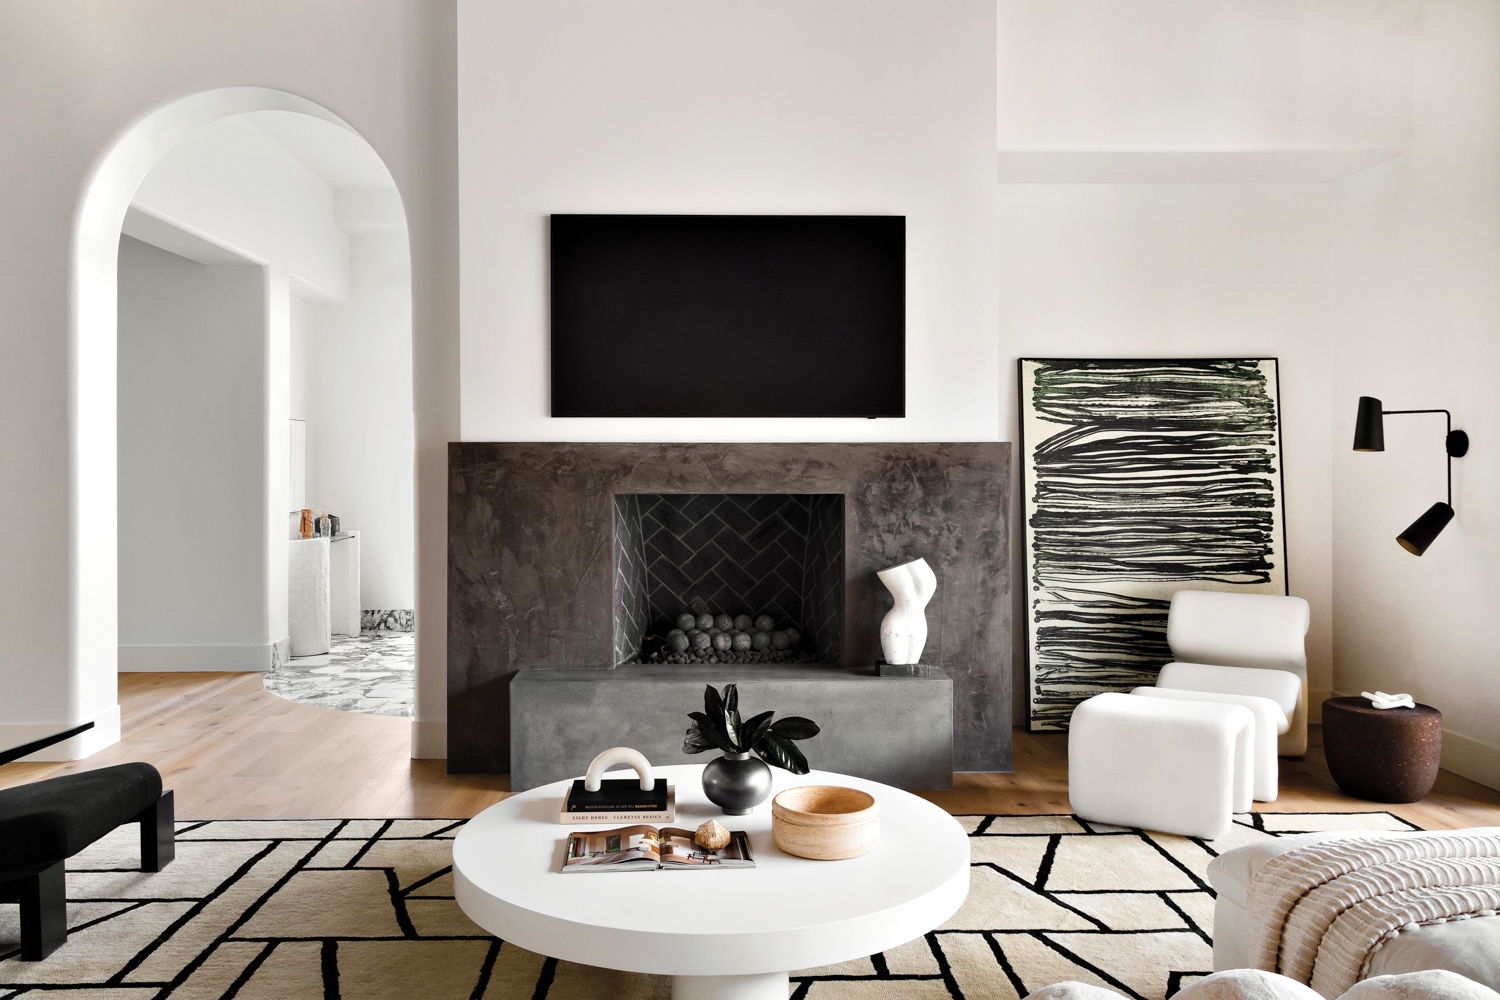 How Minimalist Furnishings Lighten Up This Paradise Valley Home